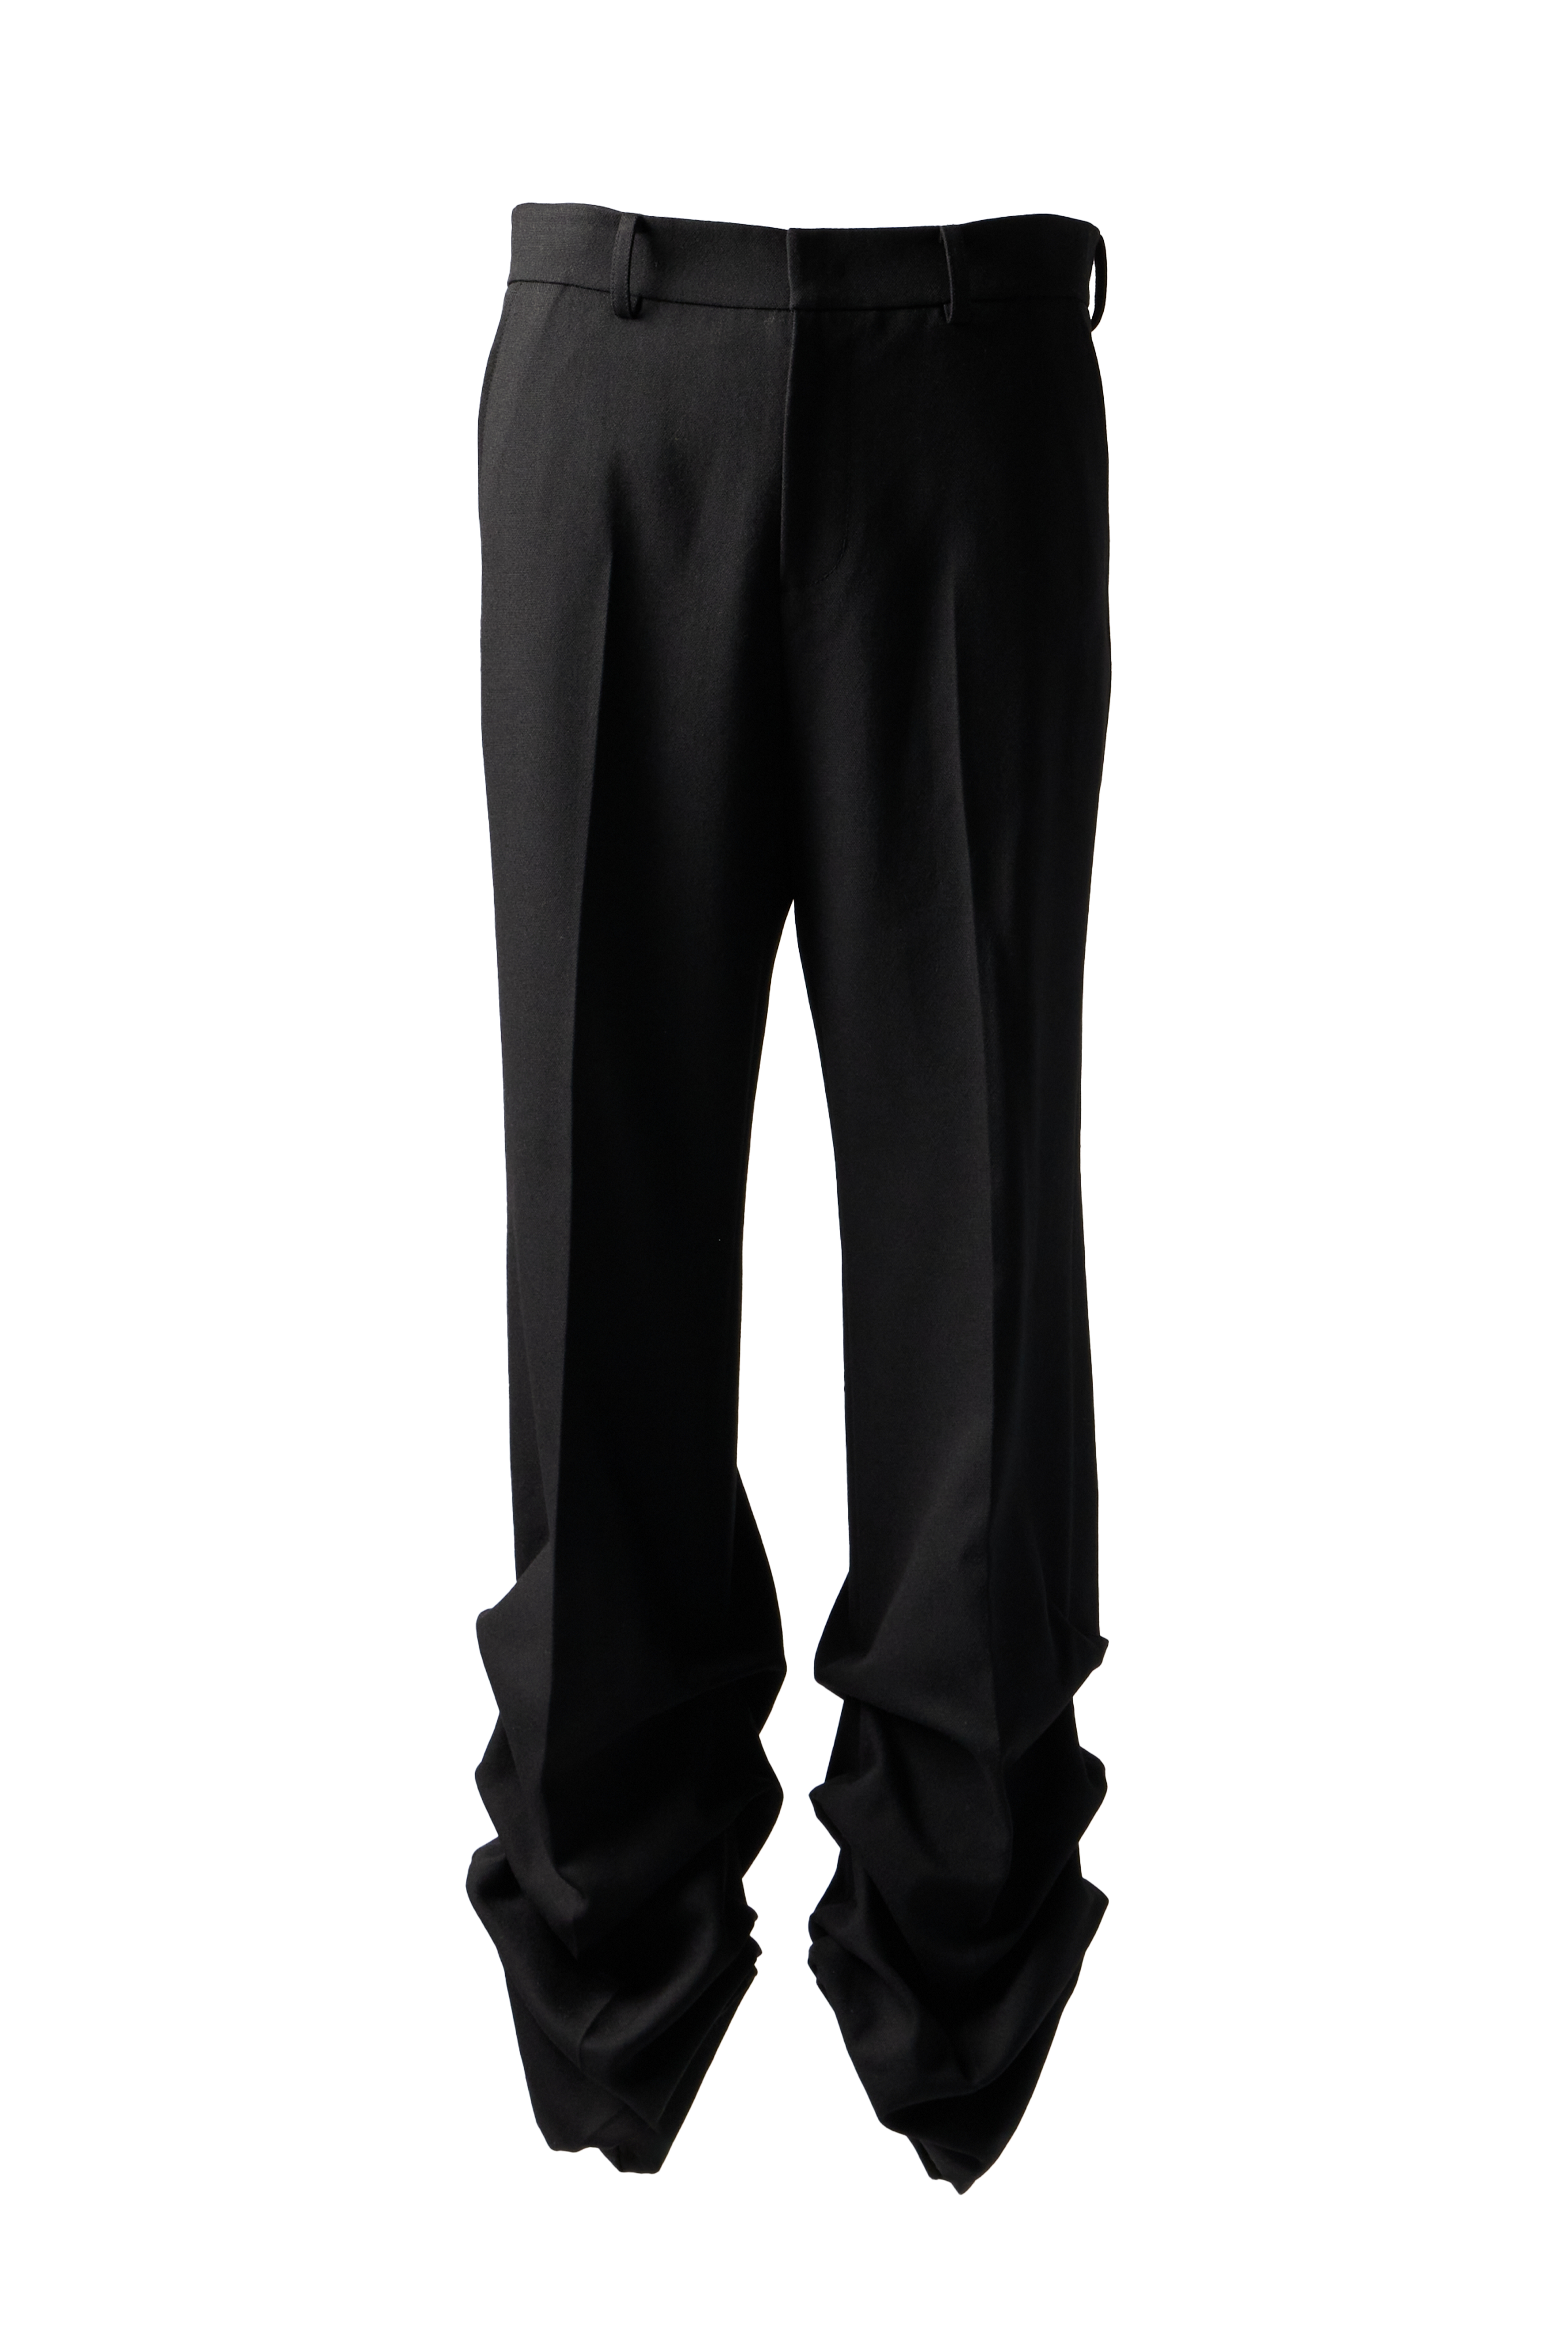 WE11DONE - Wave Boot Cut Pants product image